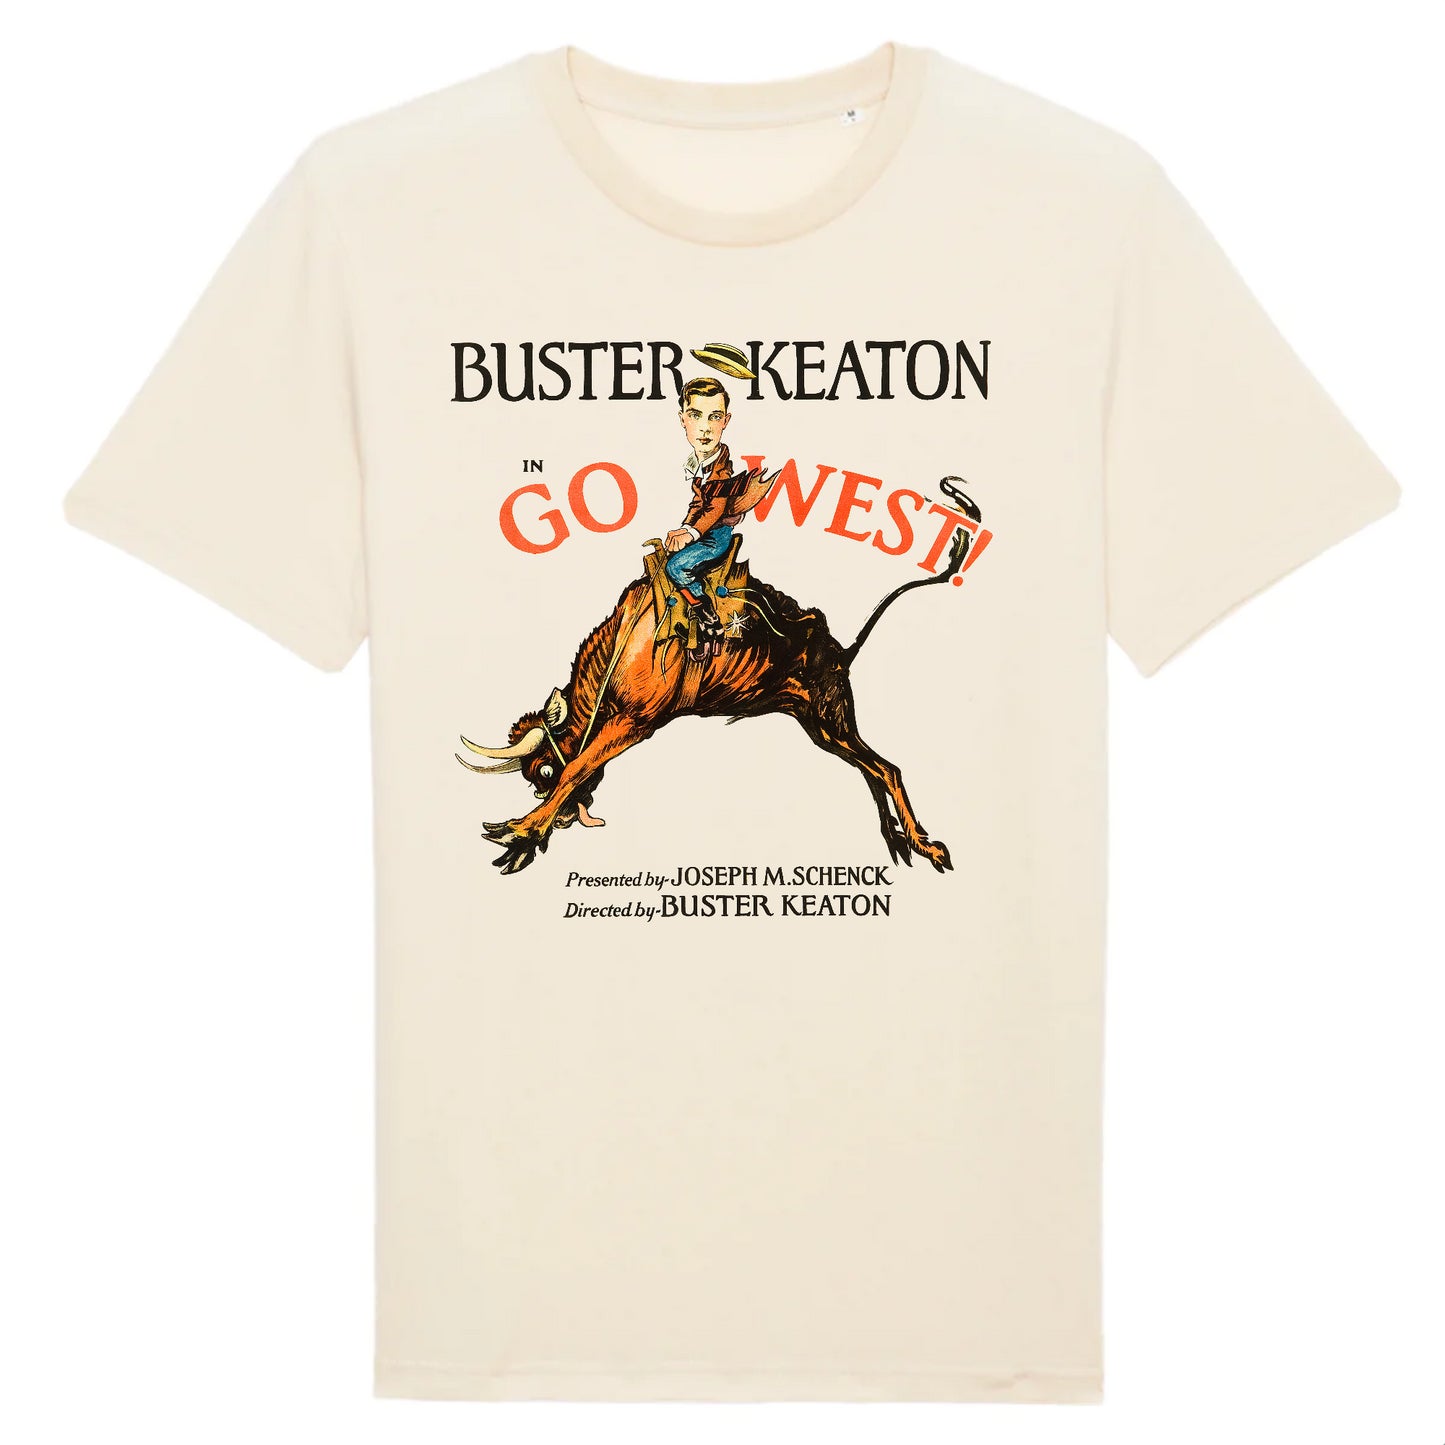 Buster Keaton in Go West, 1925 - Organic Cotton T-Shirt